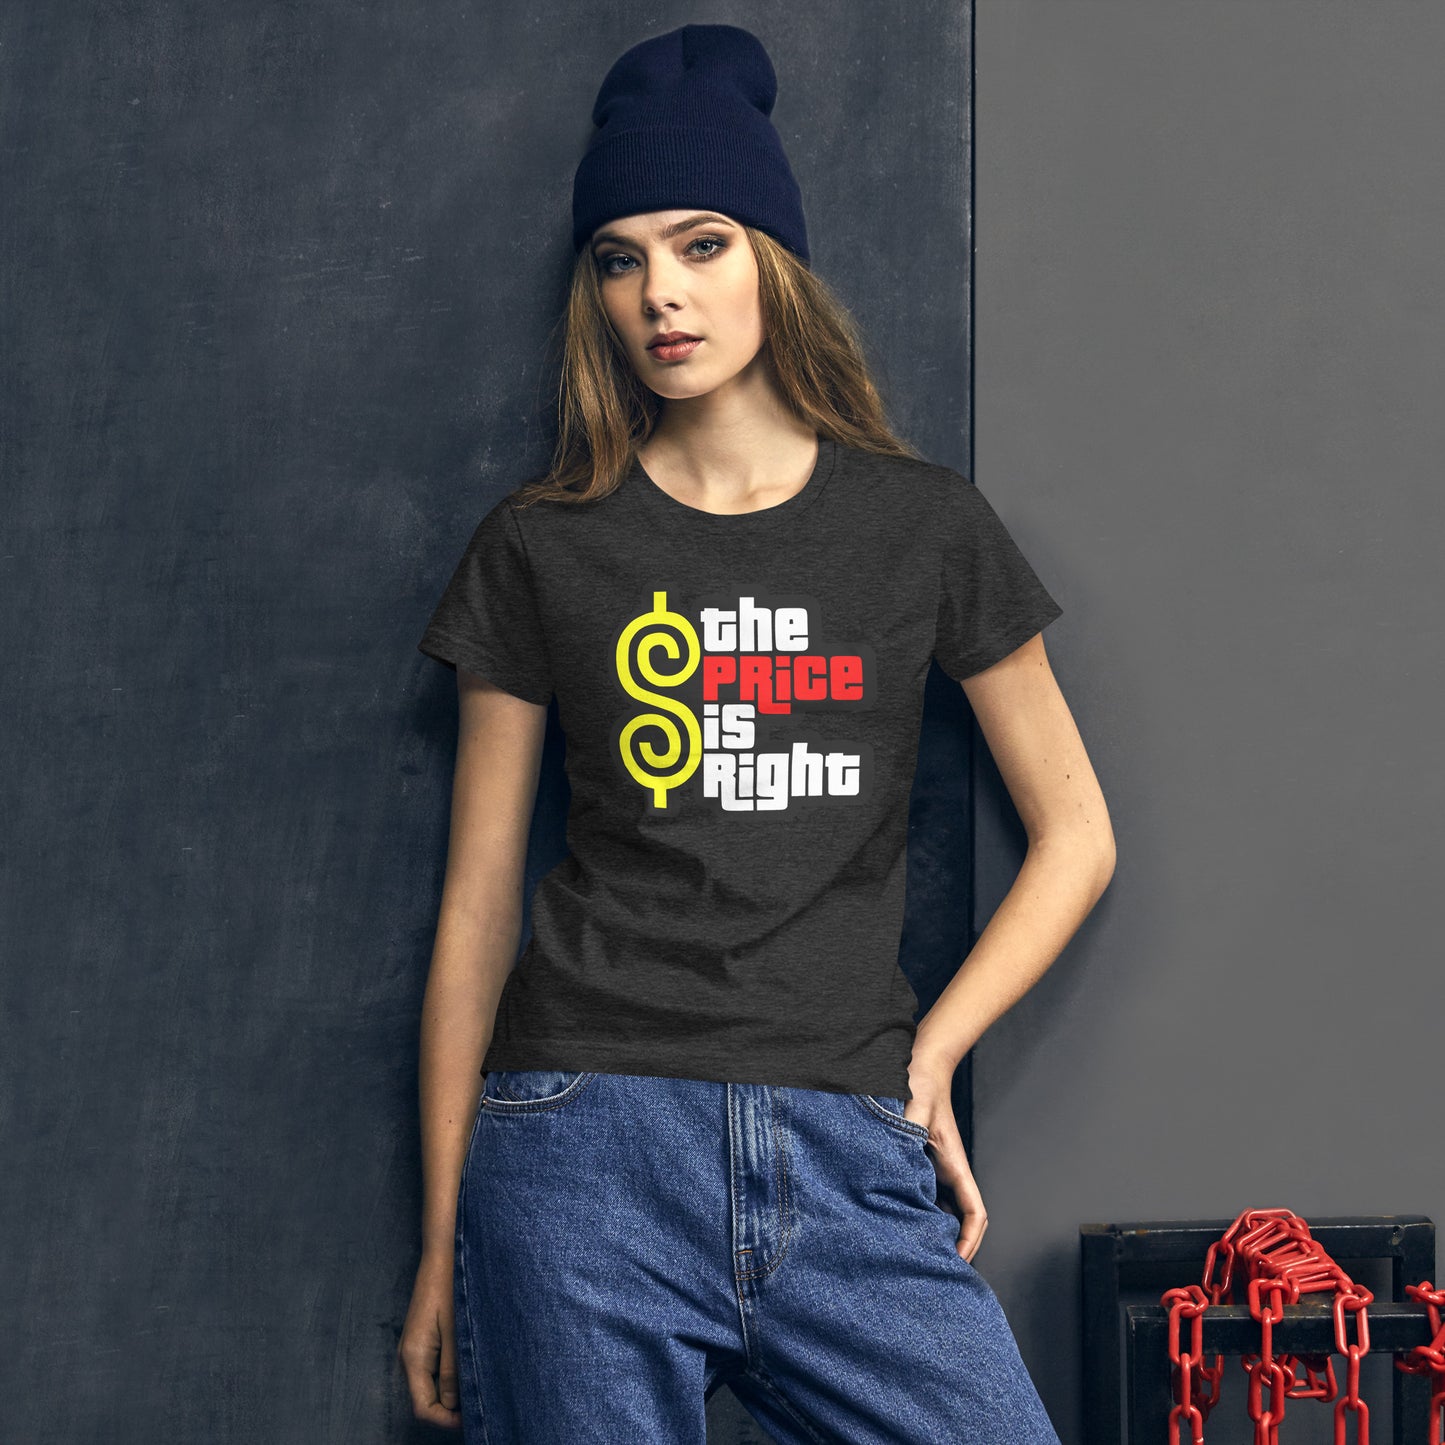 Women's short sleeve t-shirt - The Price is Right T-Shirt